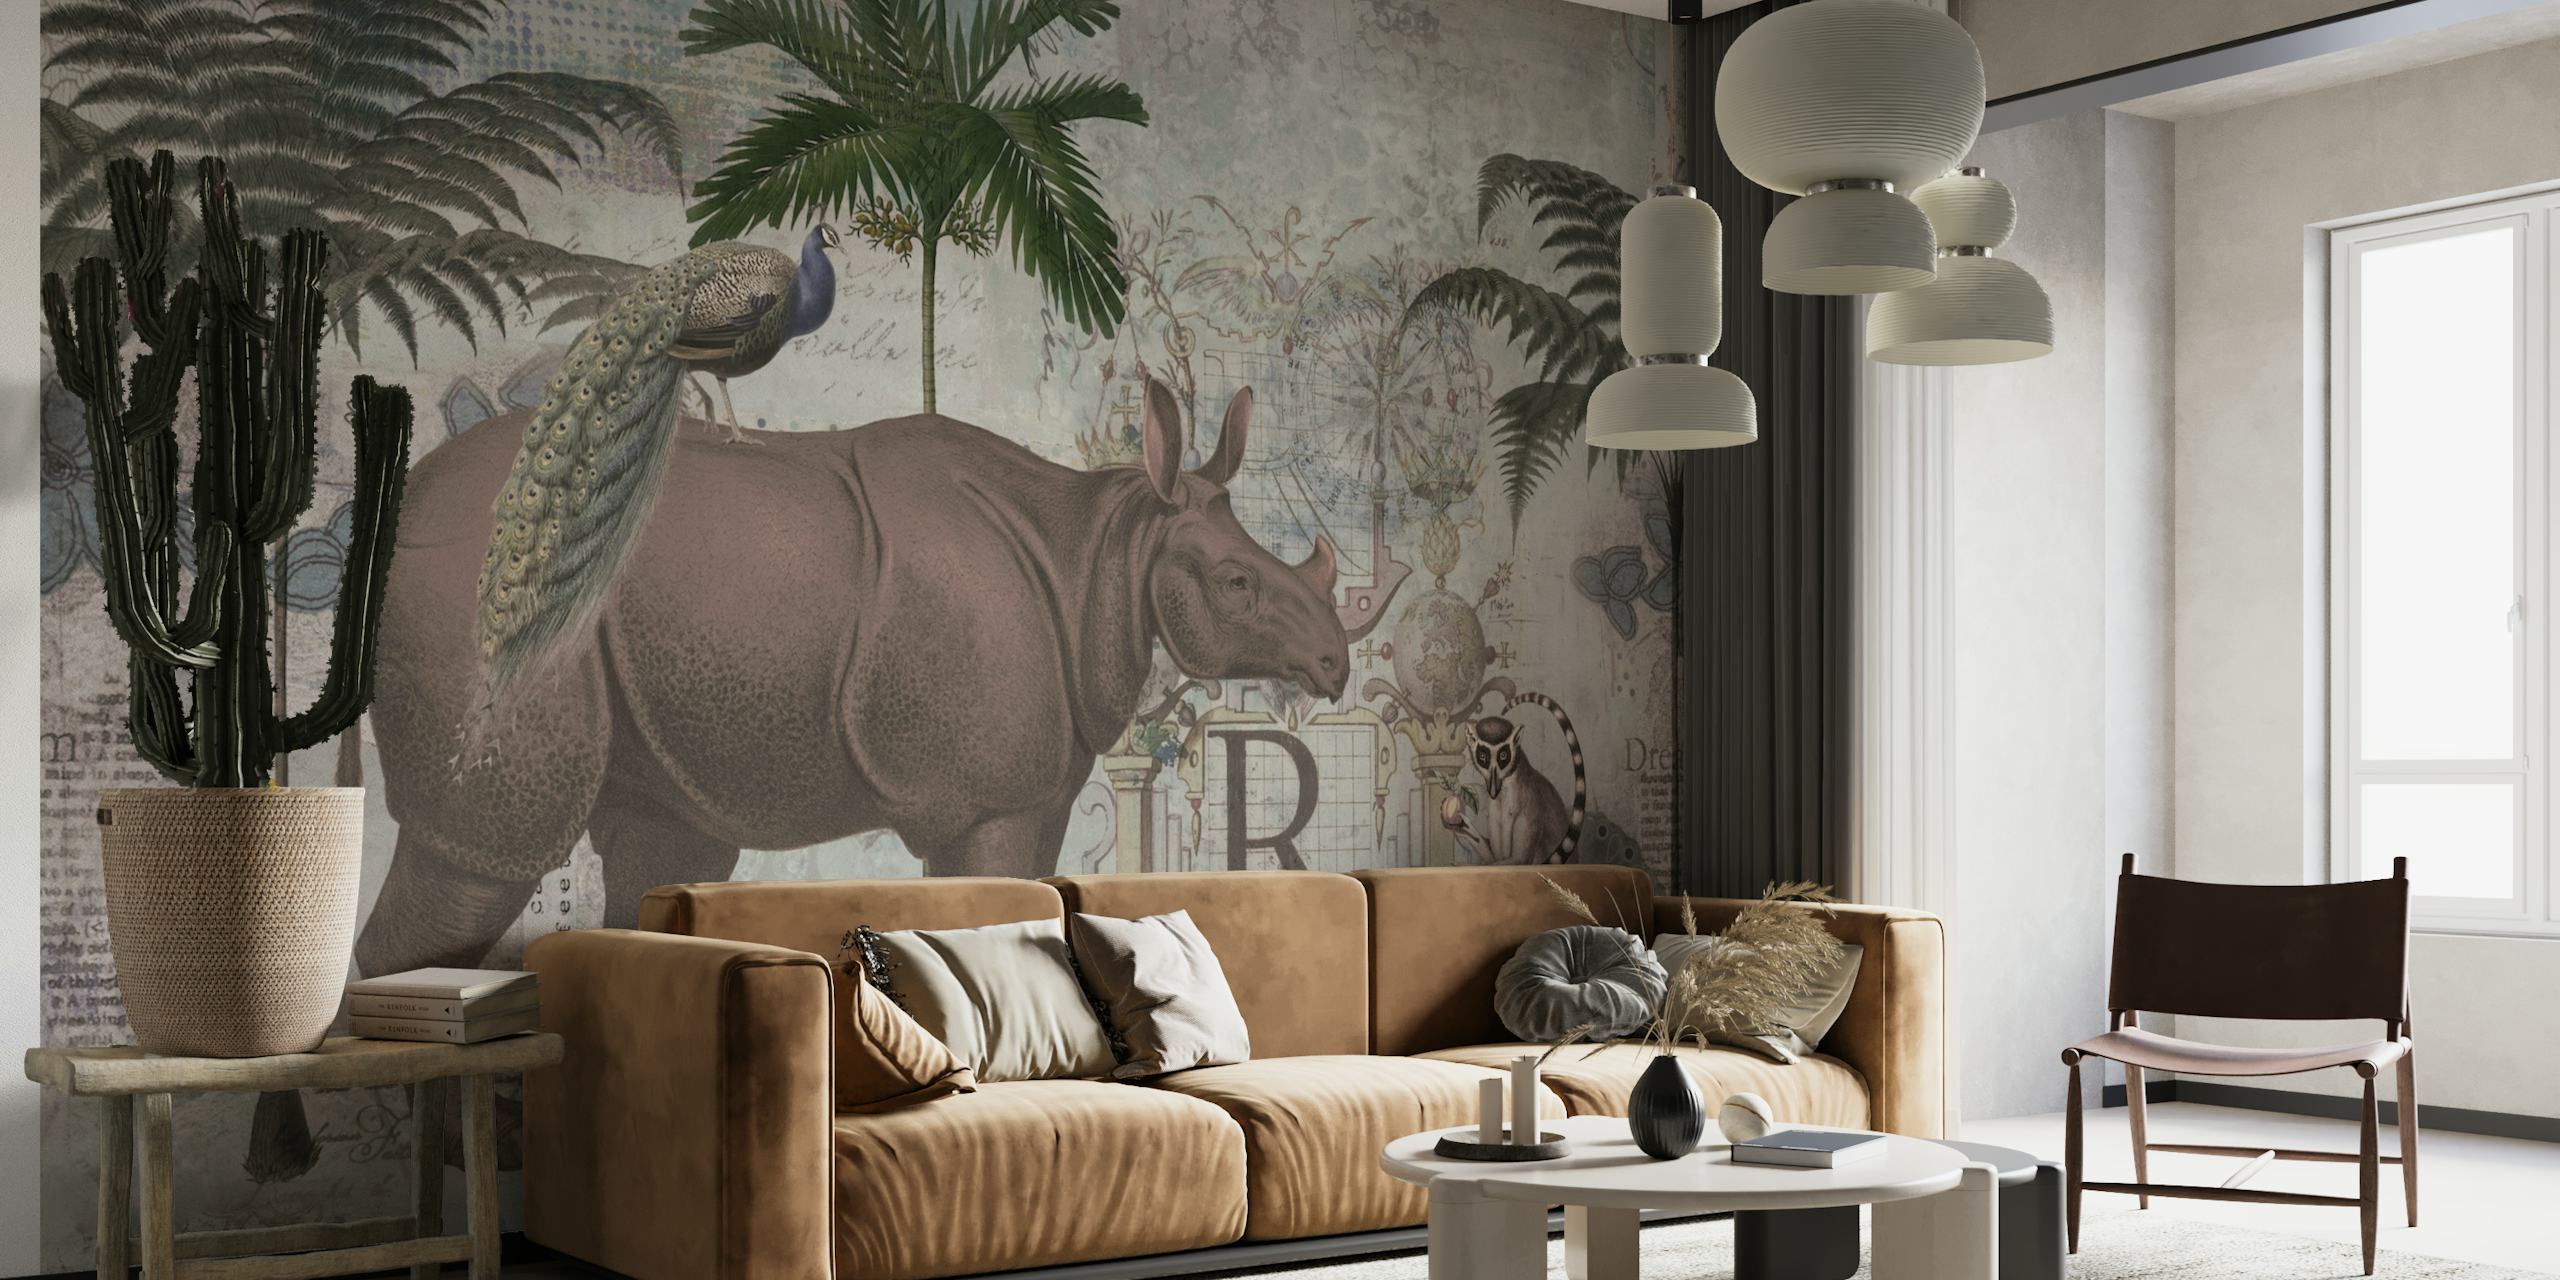 Vintage illustrated wall mural with a rhinoceros and palms at happywall.com